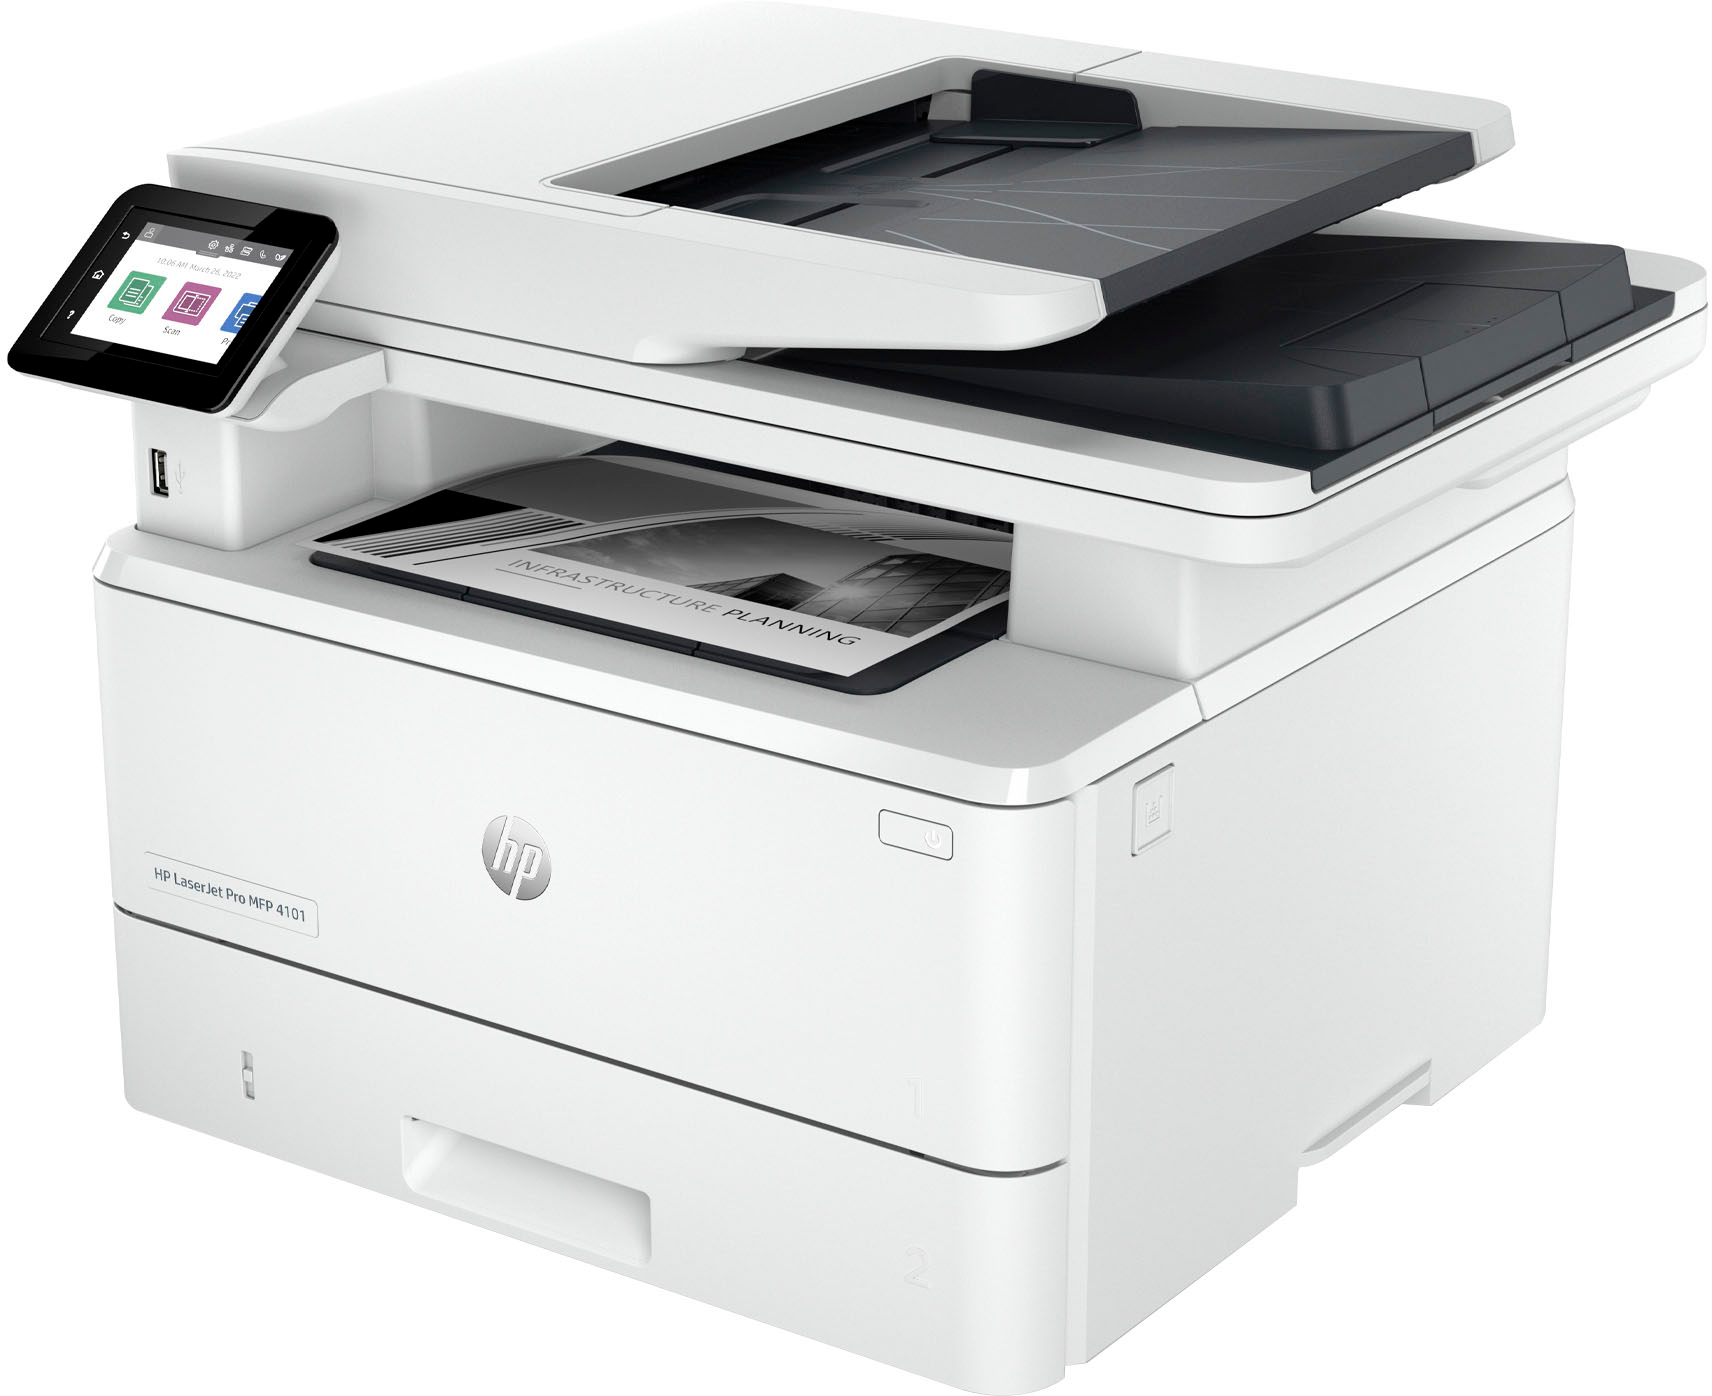 LaserJet Pro MFP 4101fdne All-In-One Black-and-White Laser Printer 3 months of Instant included HP+ White LaserJet Pro MFP 4101fdne - Best Buy